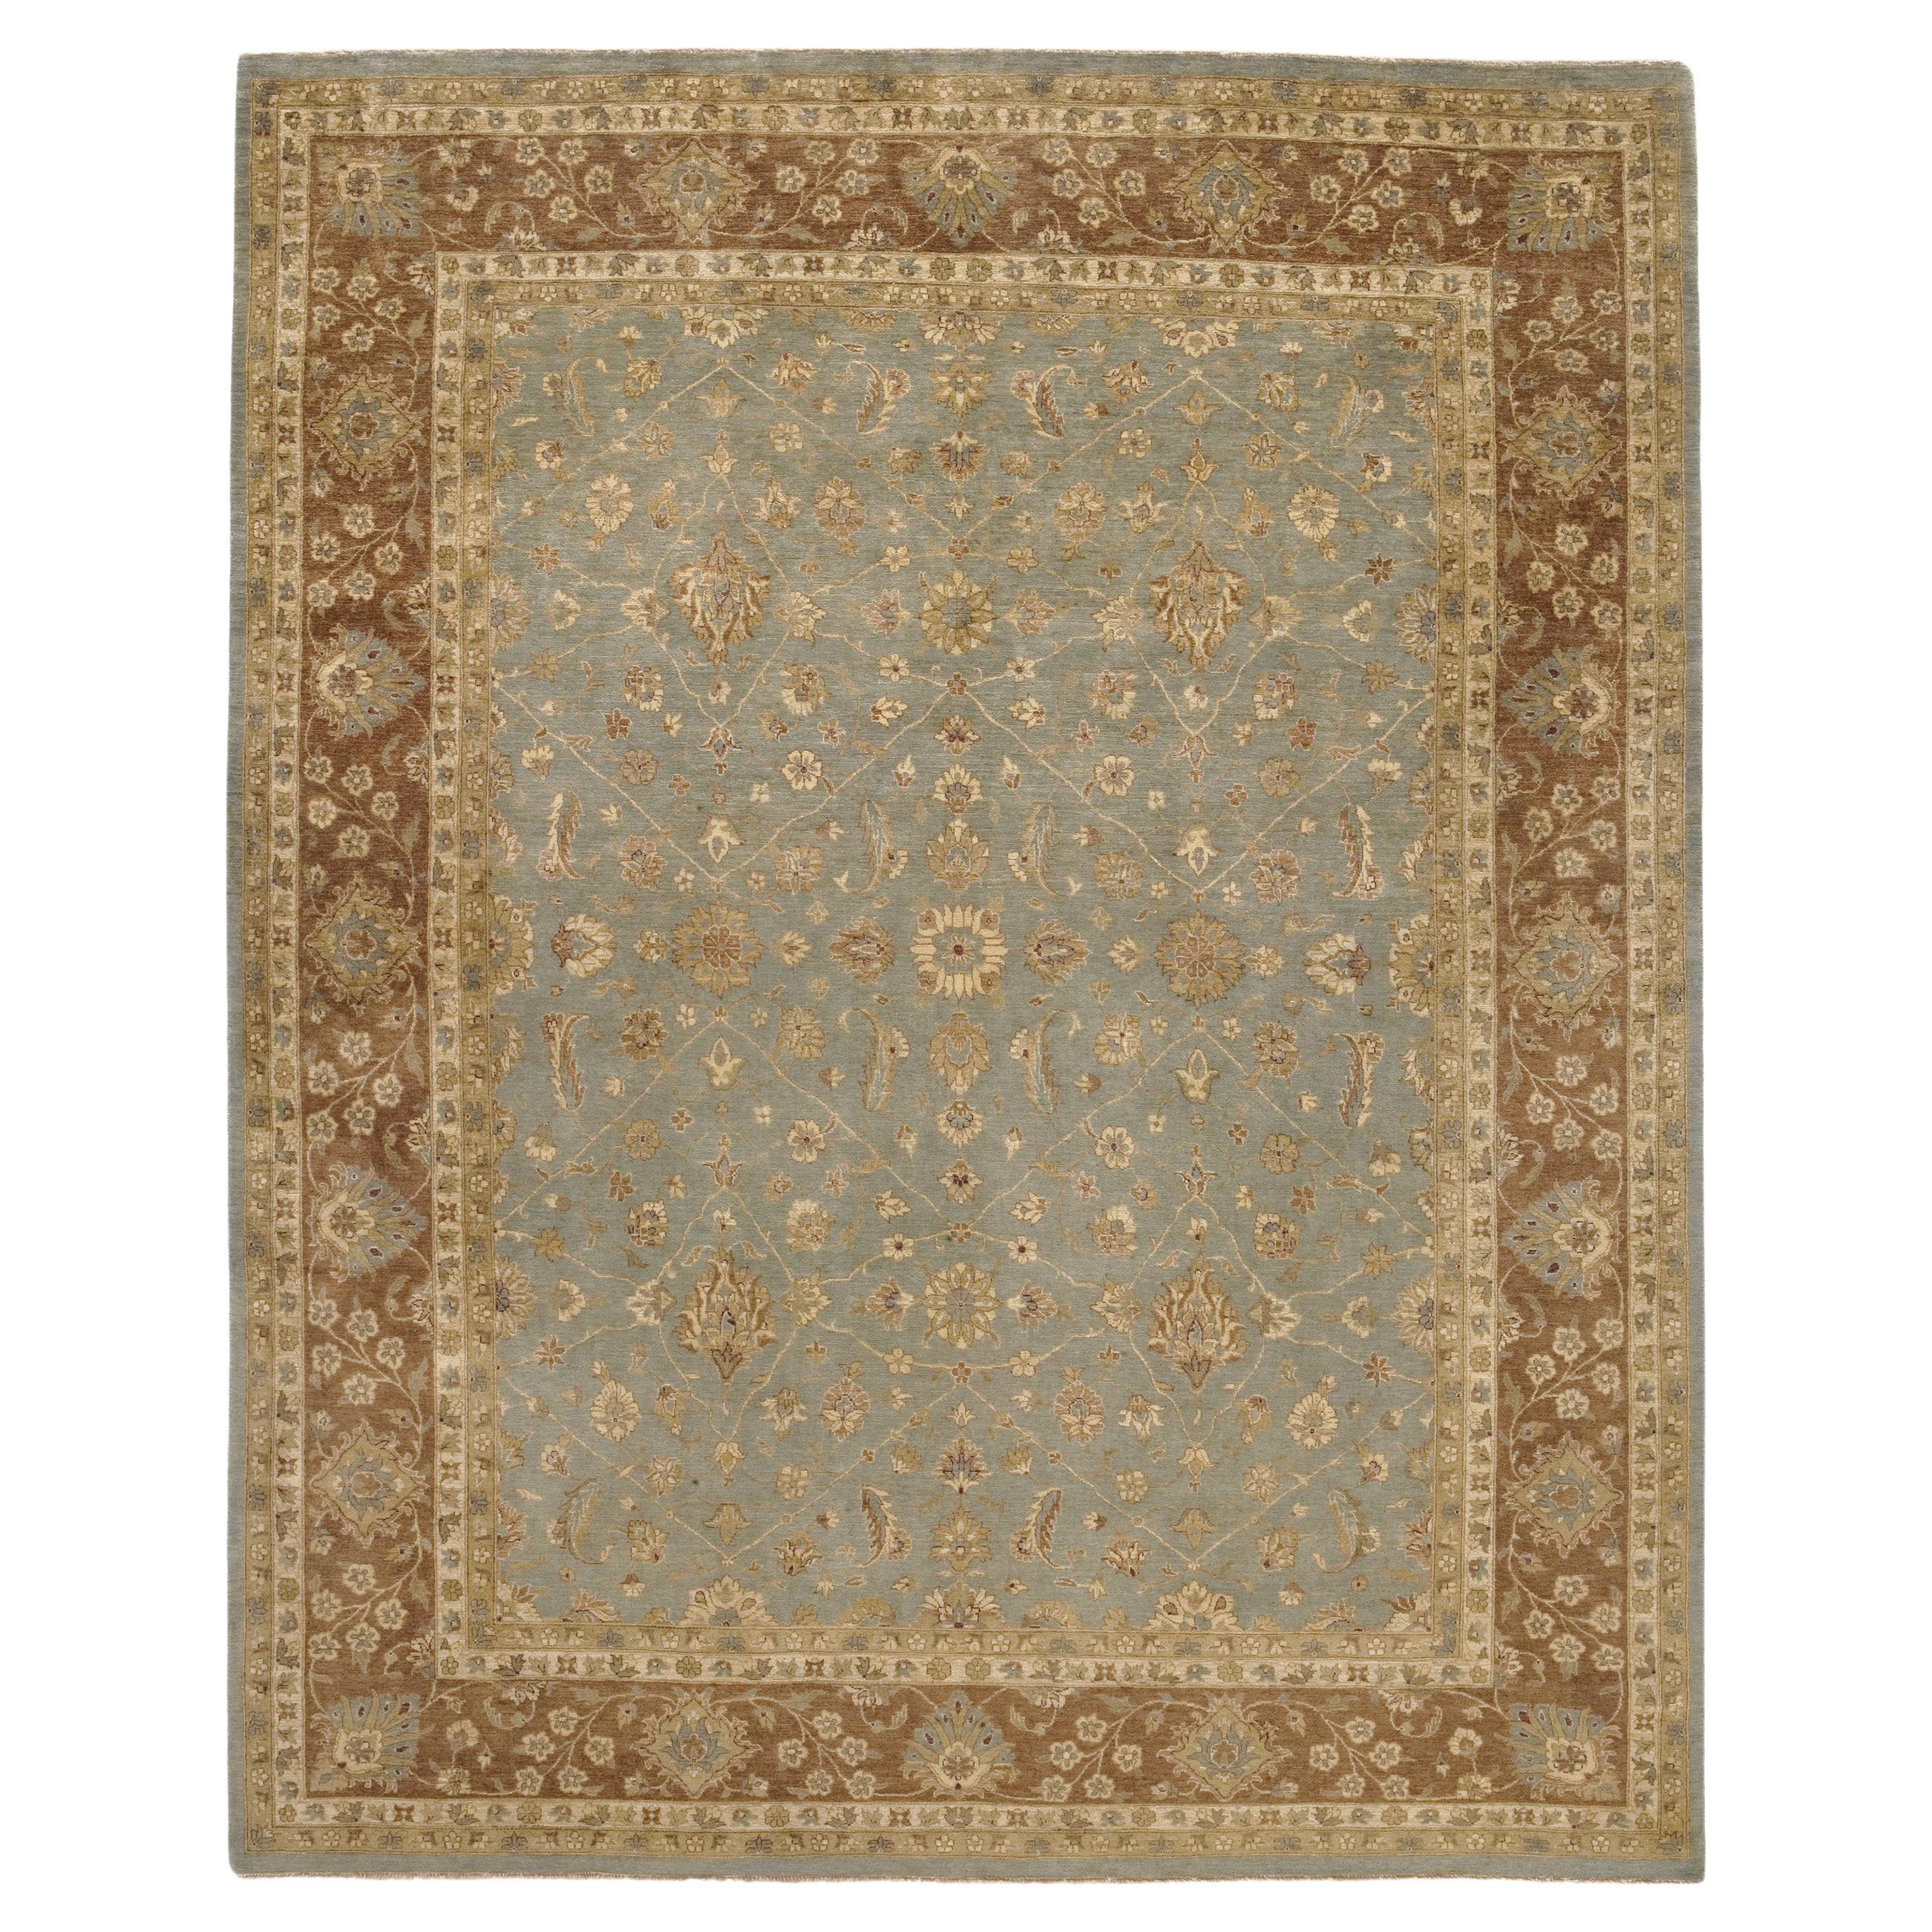 Luxury Traditional Hand-Knotted Polonaise Light Blue and Brown 12x18 Rug